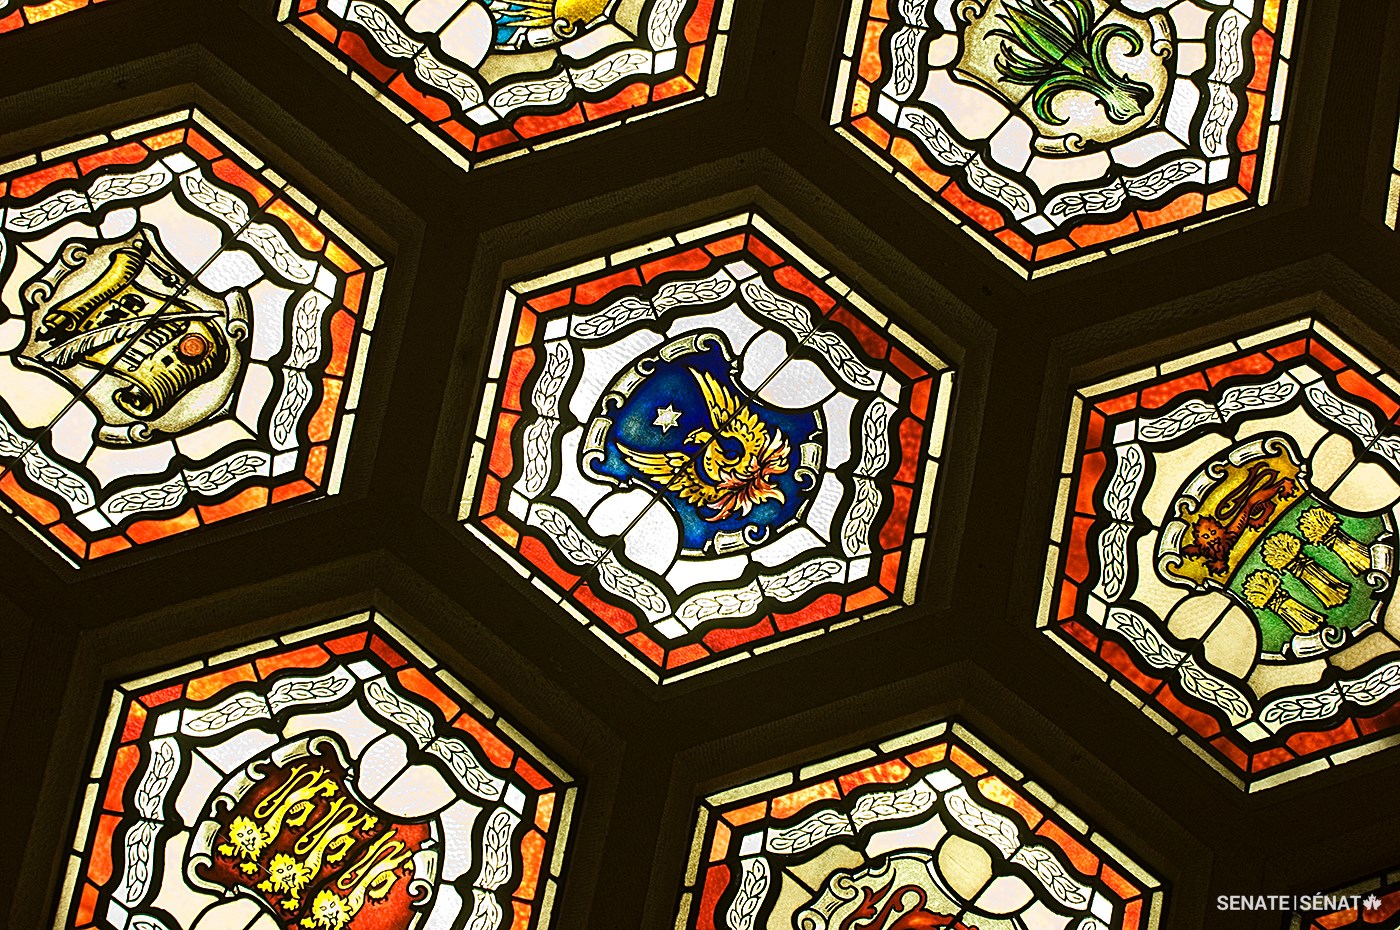 A phoenix, rising from its ashes, appears among the 105 stained-glass panels in the Senate foyer ceiling. It alludes to the 1916 Parliament Hill fire and the resurrection of Centre Block.